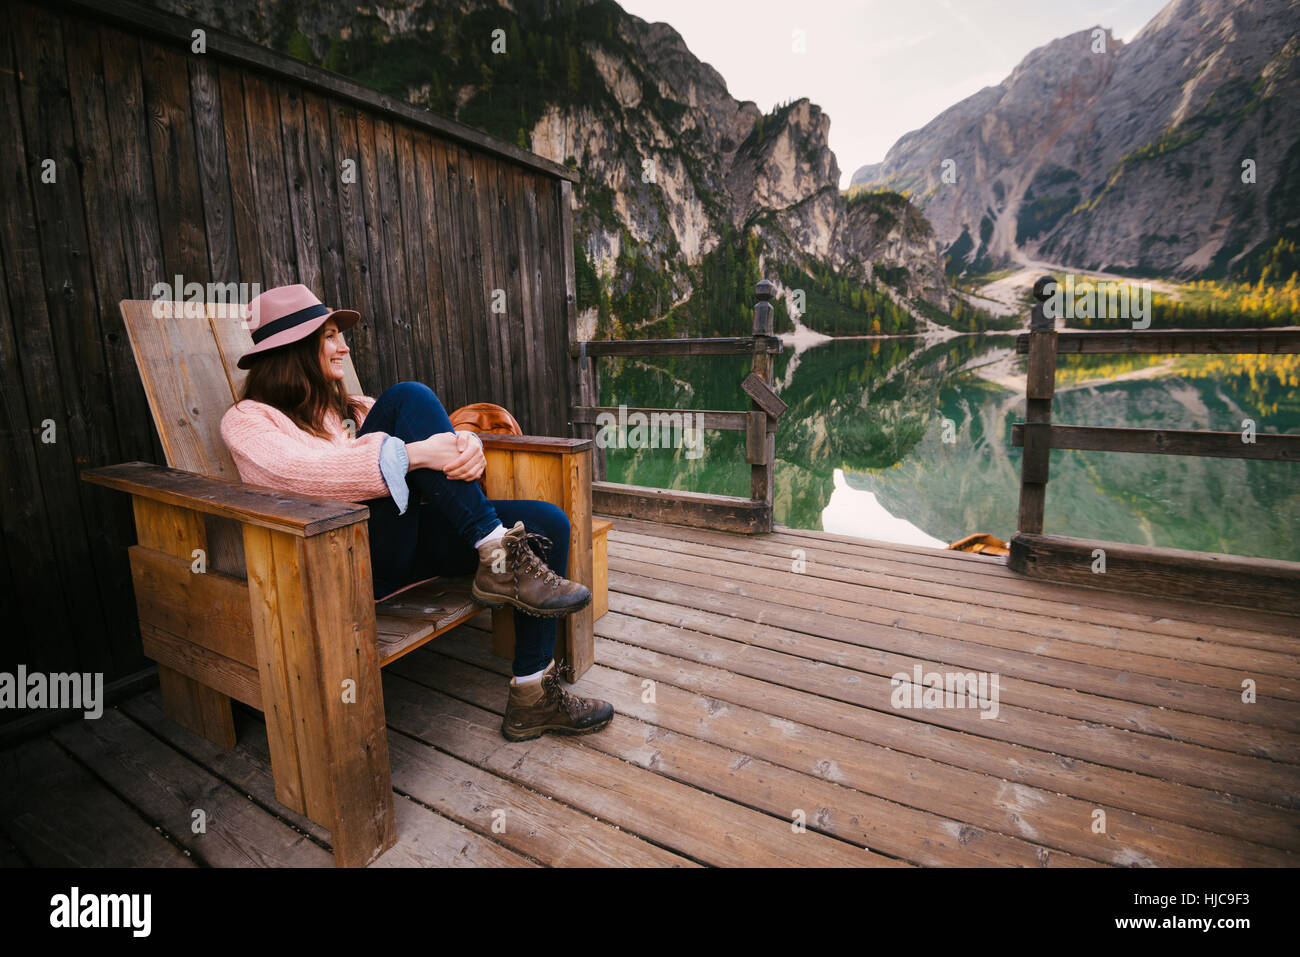 Woman relaxing on wooden chair, Lago di Braies, Dolomite Alps, Val di Braies, South Tyrol, Italy Stock Photo